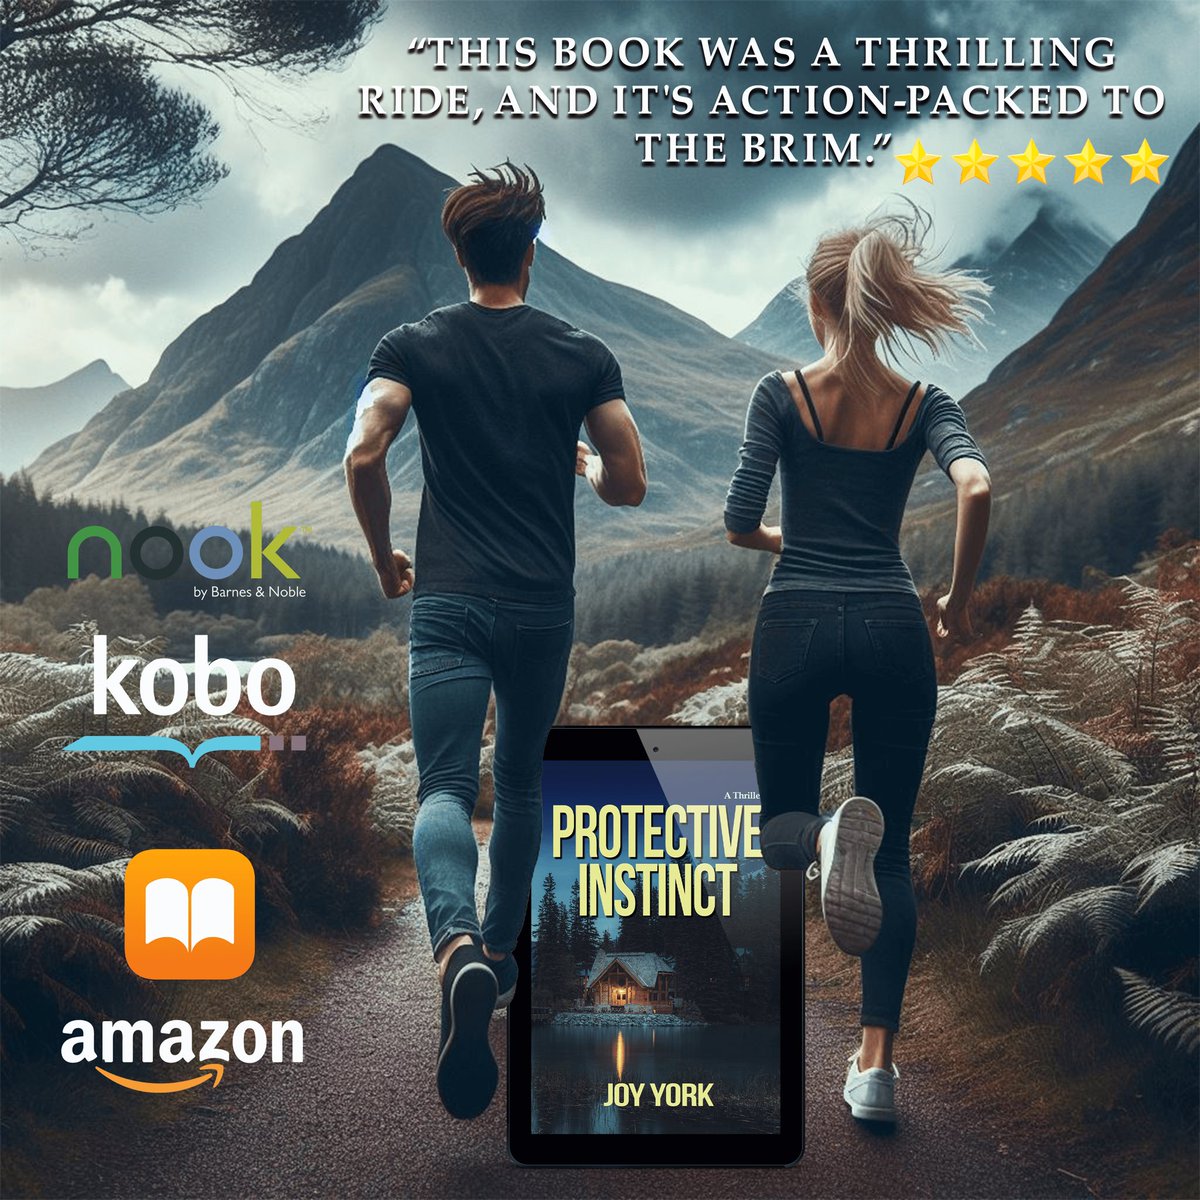 PROTECTIVE INSTINCT Anything can happen when a bestselling crime novelist and a southern kindergarten teacher are running from the mob! #thriller #suspense #CrimeFiction #actionadventure #GooglePlay Banner by @KathleenHarrym1 Available on Amazon: amazon.com/dp/B0CPDQ8MCL and…